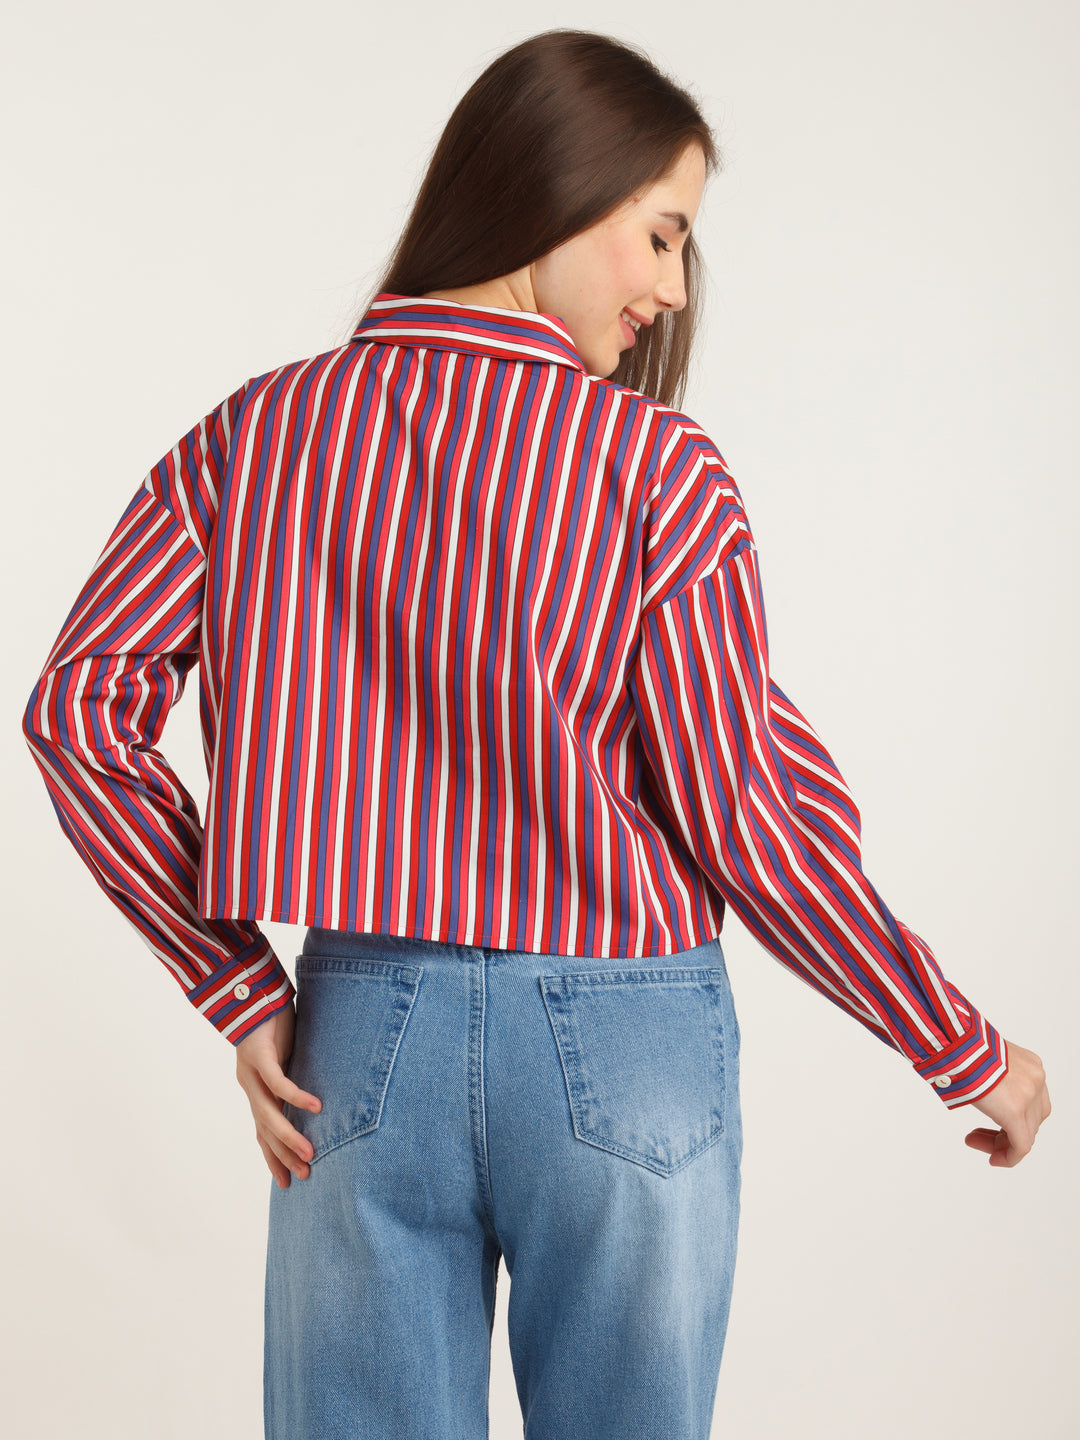 Multicolored Stripes Cropped Shirt For Women